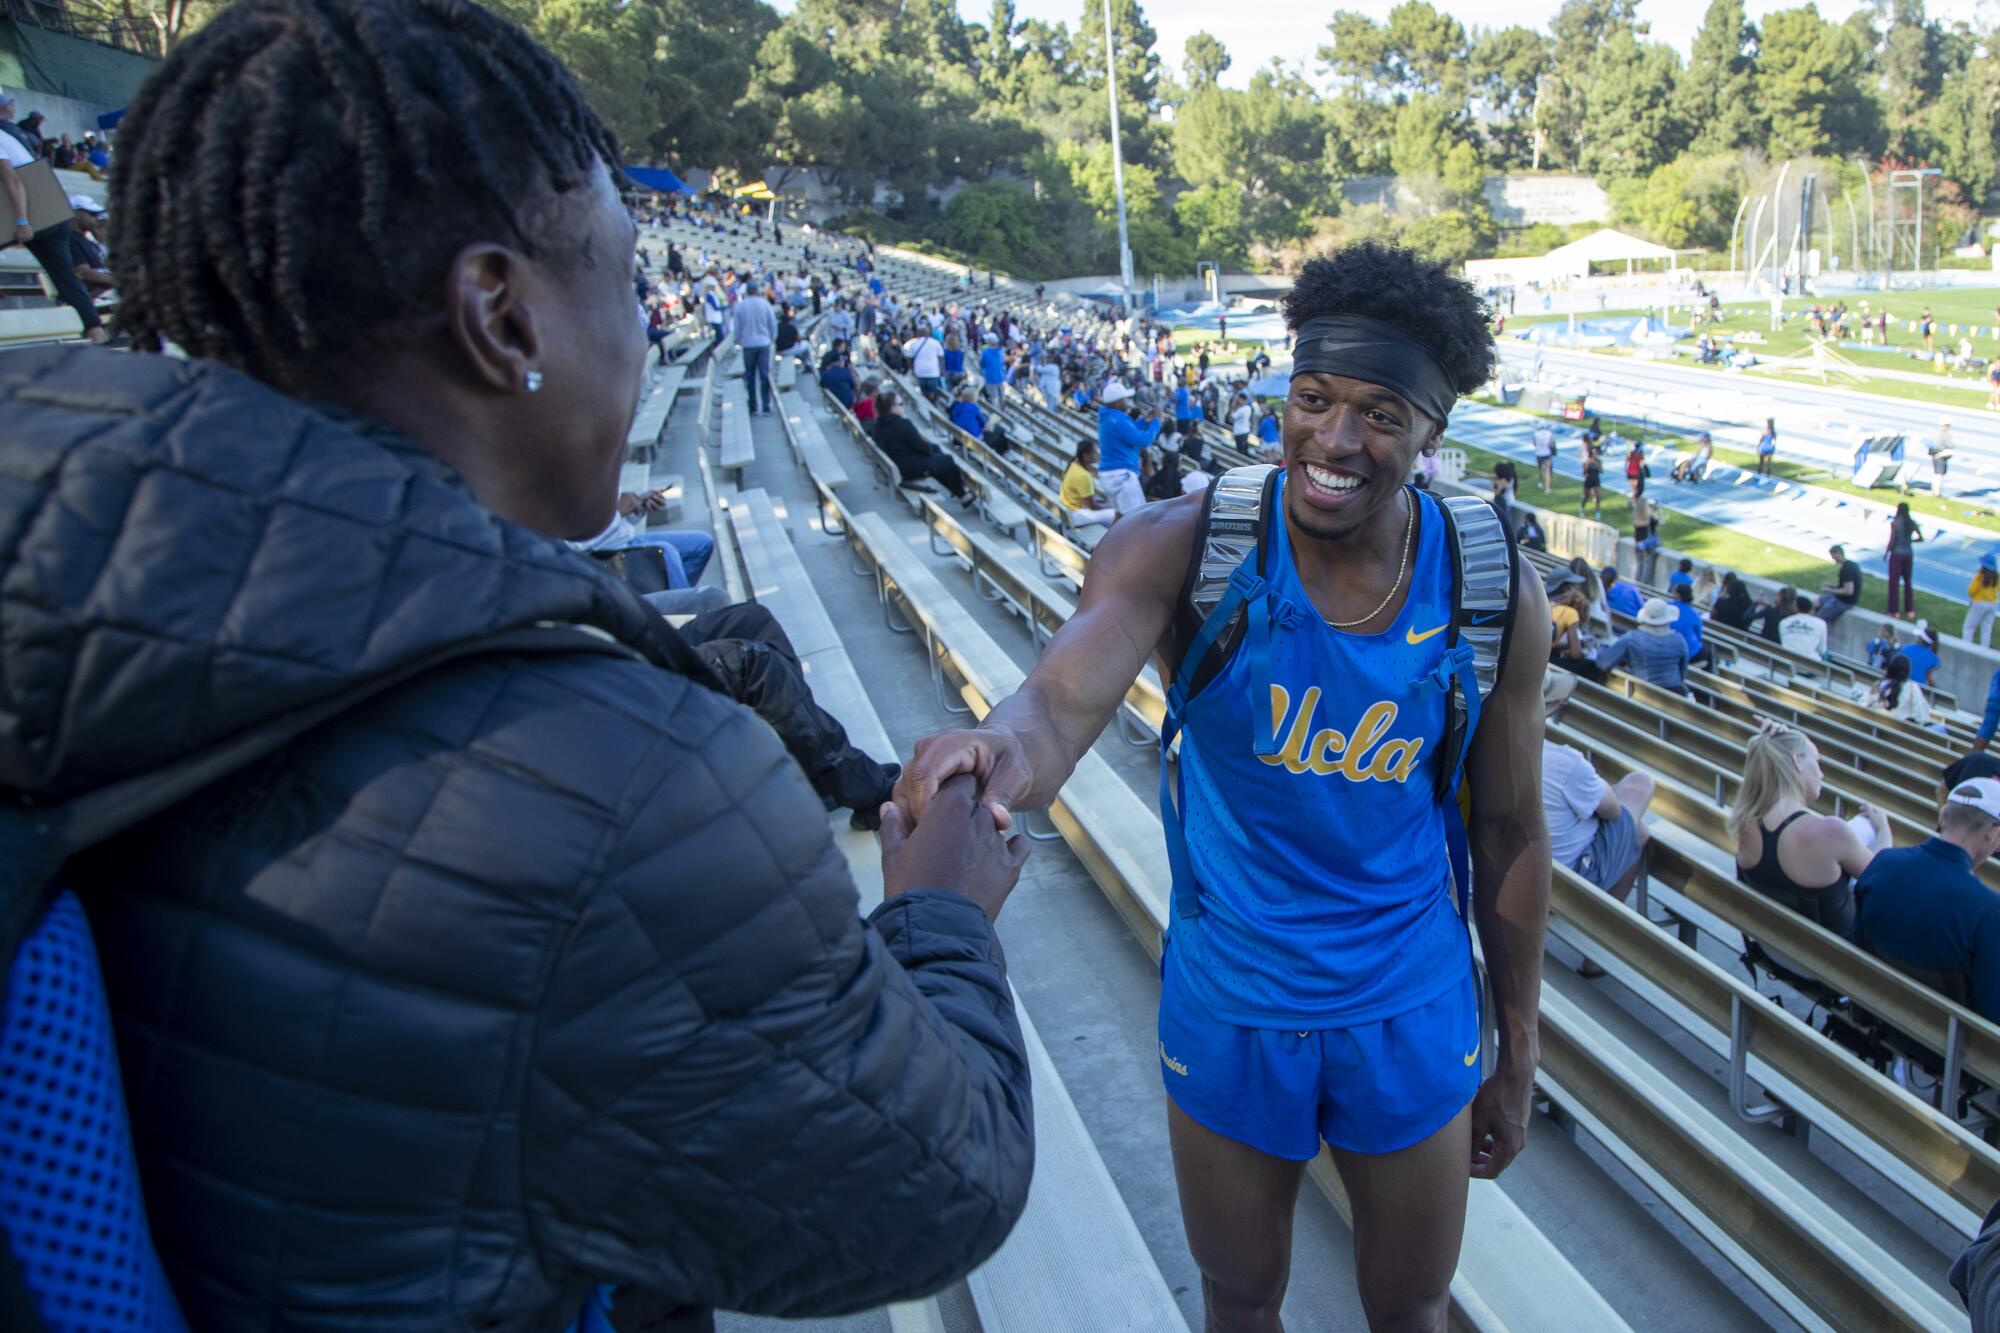 An athlete in UCLA runner's gear shakes hands in the stands with a friend 